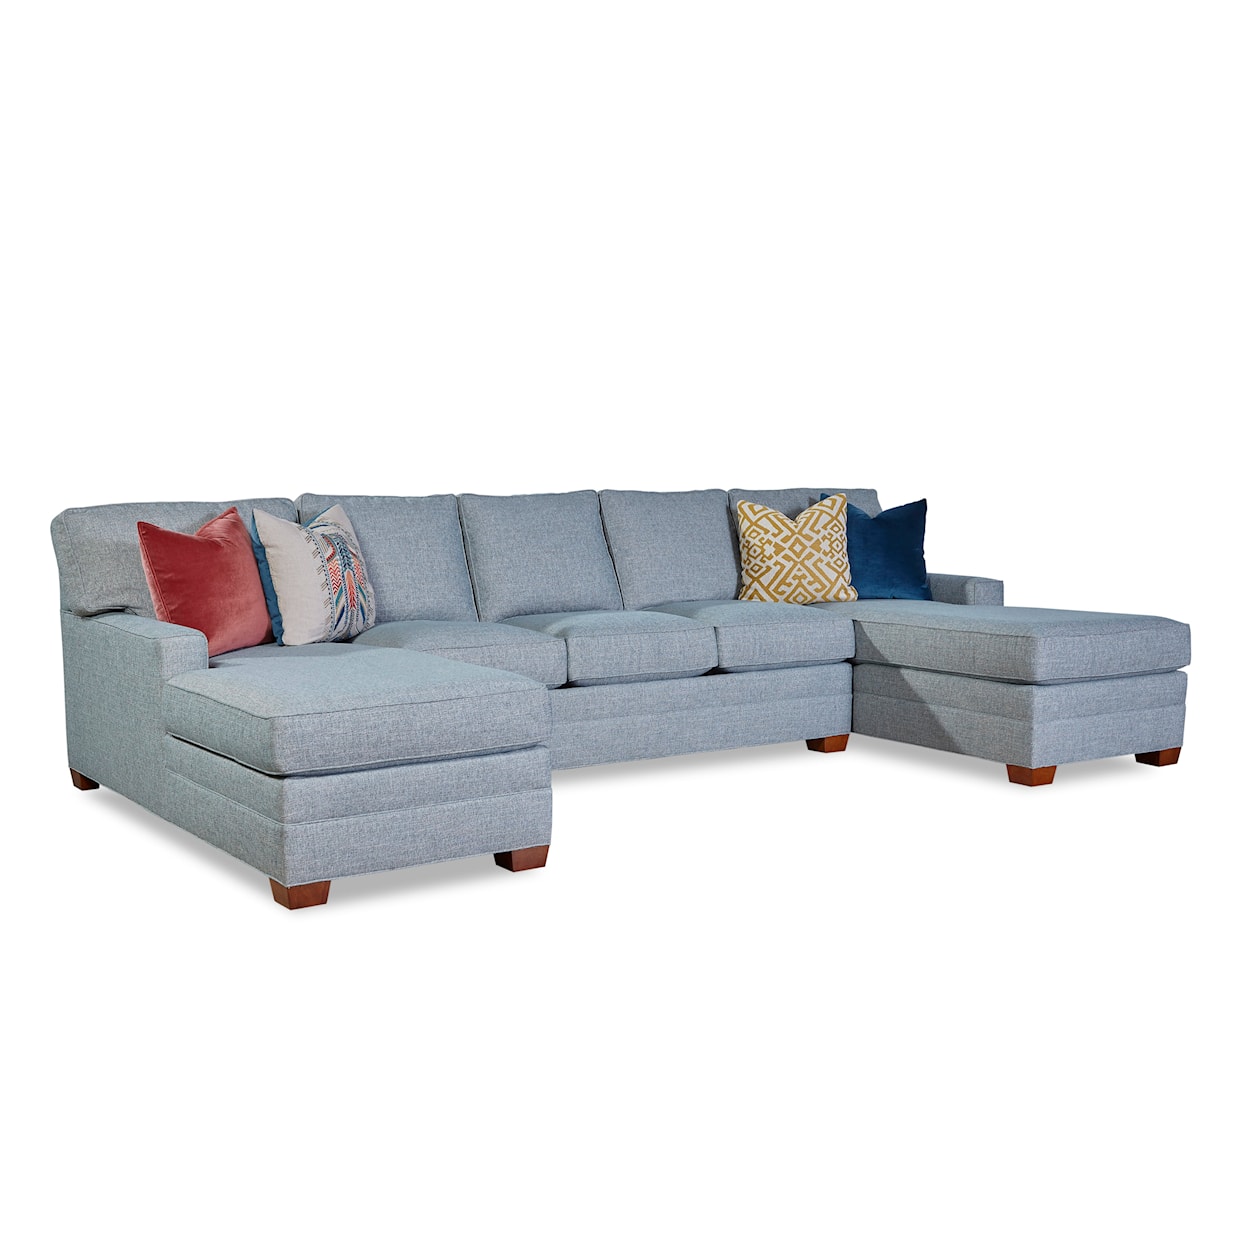 Huntington House 2062 5-Seat Sectional Sofa with Chaises